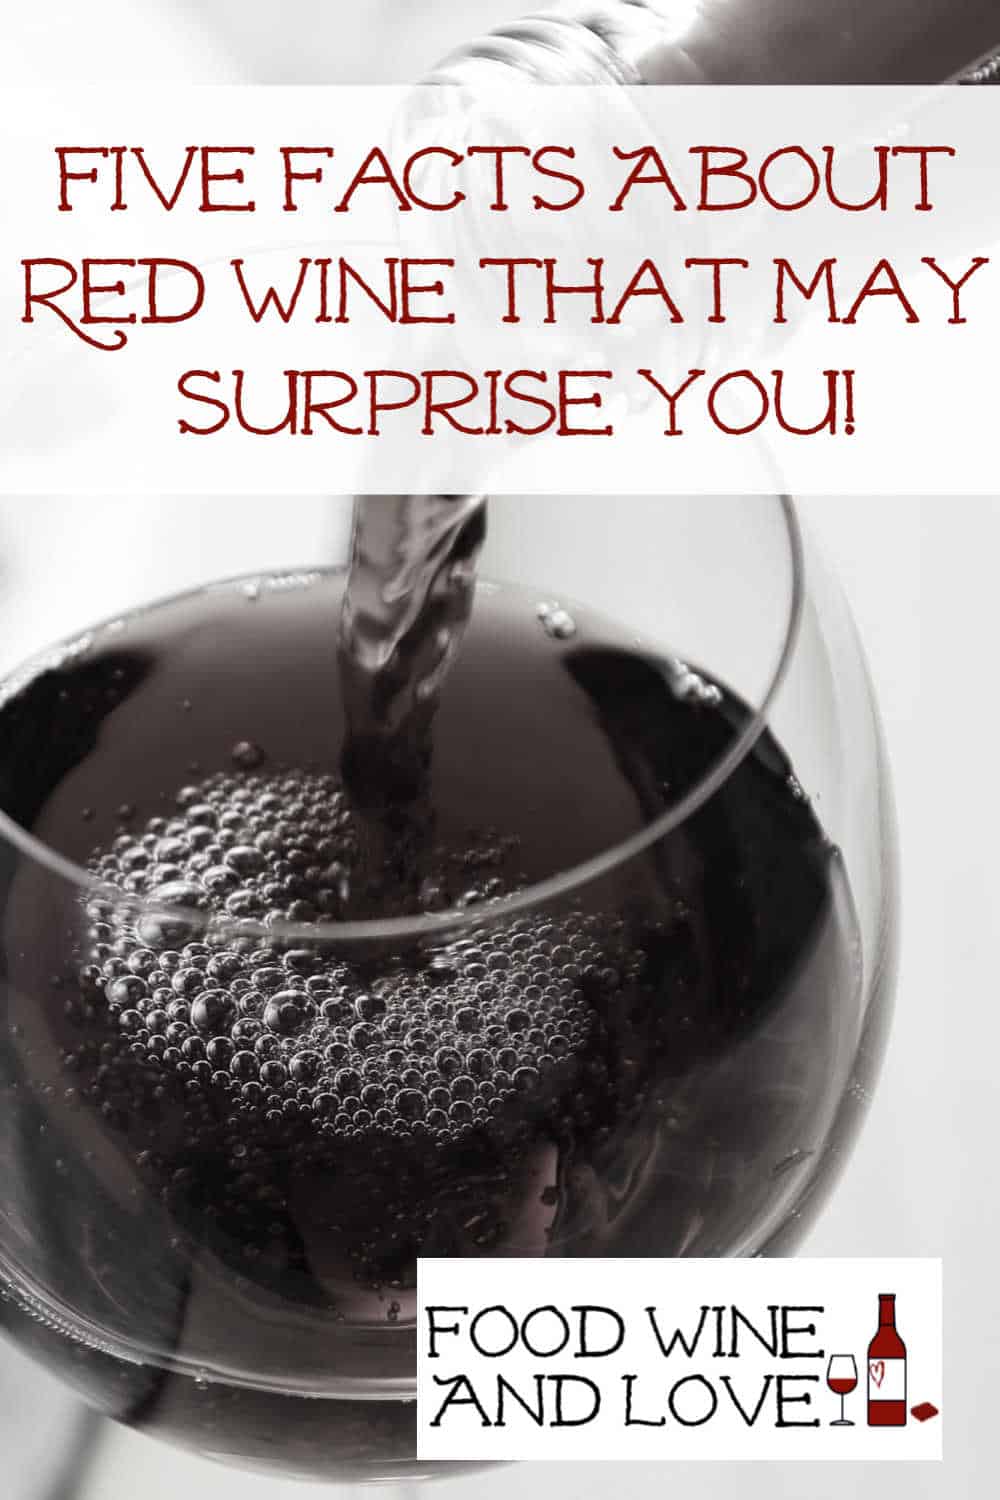 Five Facts About Red Wine That May Surprise You!